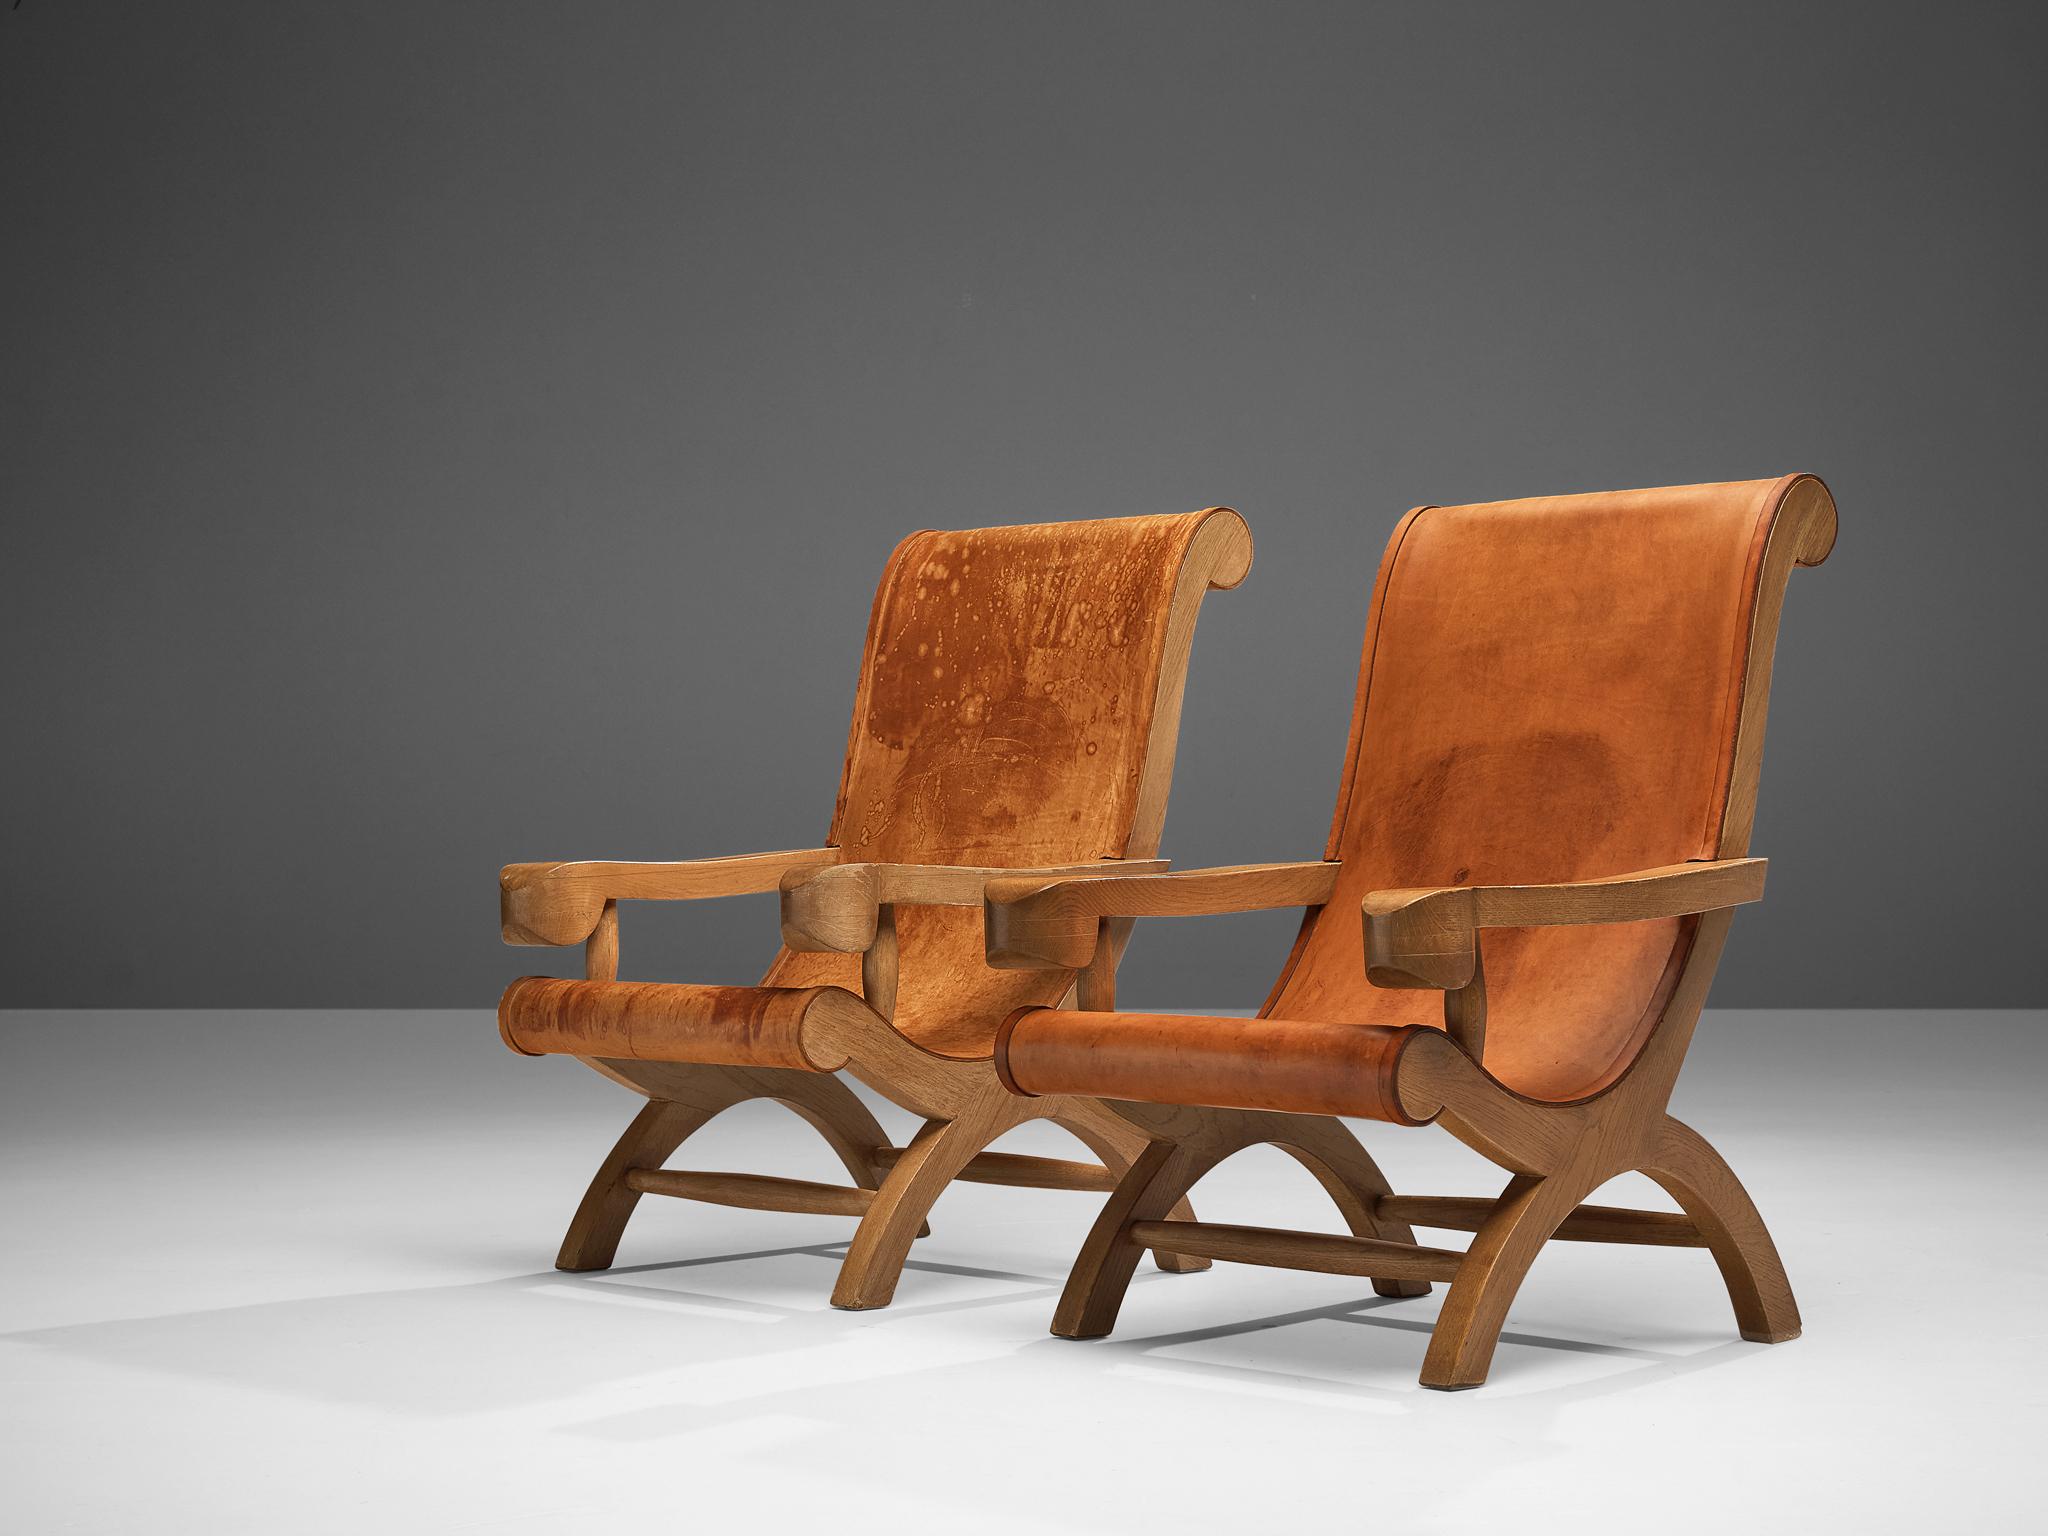 Clara Porset Lounge Chairs 'Butaque' in Original Patinated Leather 2